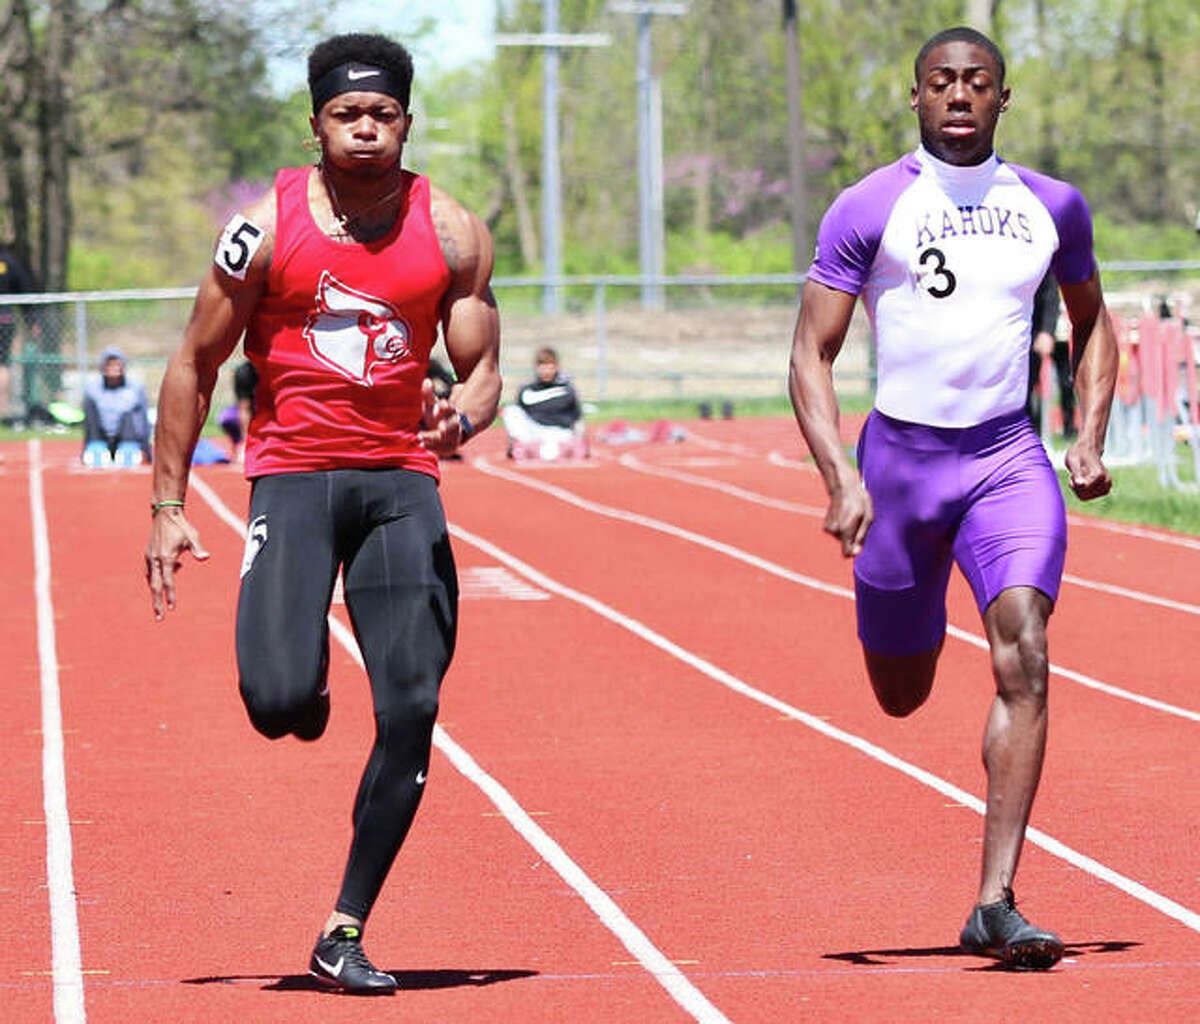 Alton’s Deonte McGoy (left) beats Collinsville’s Jermarrion Stewart to the finish in the 100 meters on April 20 at the Winston Brown Invitational. After Stewart lost to McGoy on both the 100 and 200 in their last two invitational matchups, Stewart picked up wins in both races over McGoy on Saturday at the Collinsville Invite.